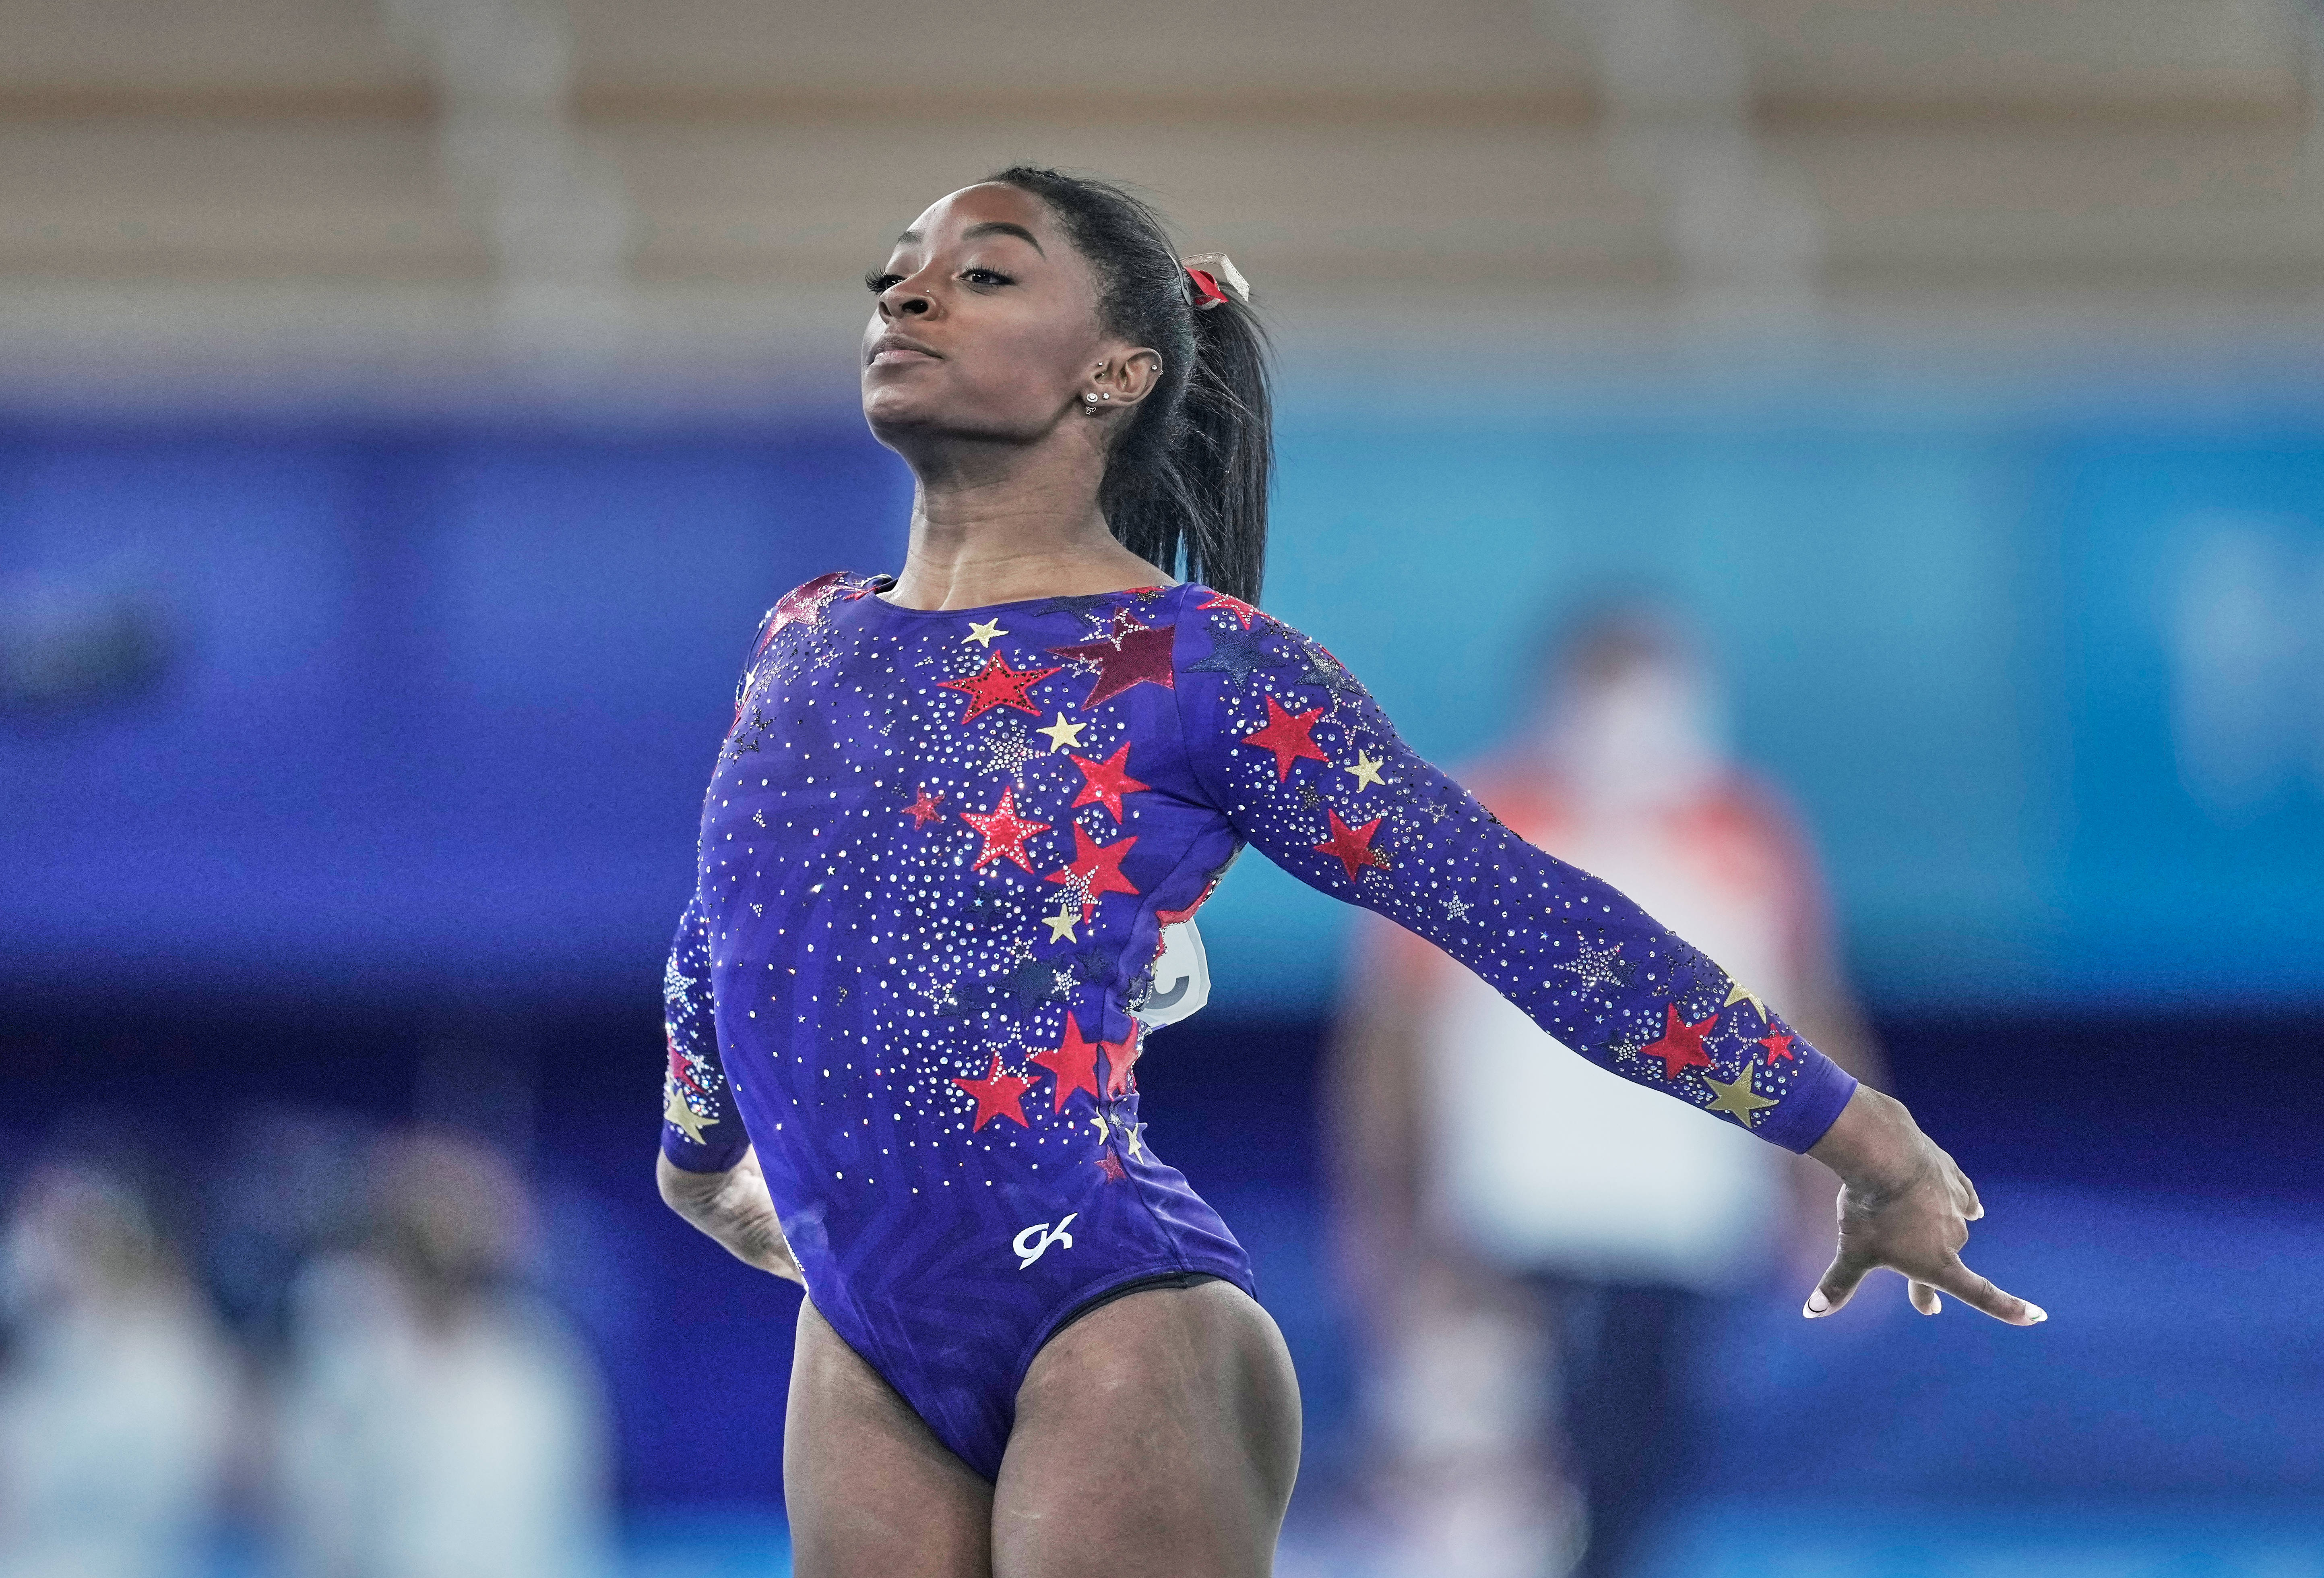 https://www.lifeandstylemag.com/wp-content/uploads/2021/08/everything-simone-biles-wore-olympics-2021-tokyo-2.jpg?fit=5773%2C3919&quality=86&strip=all